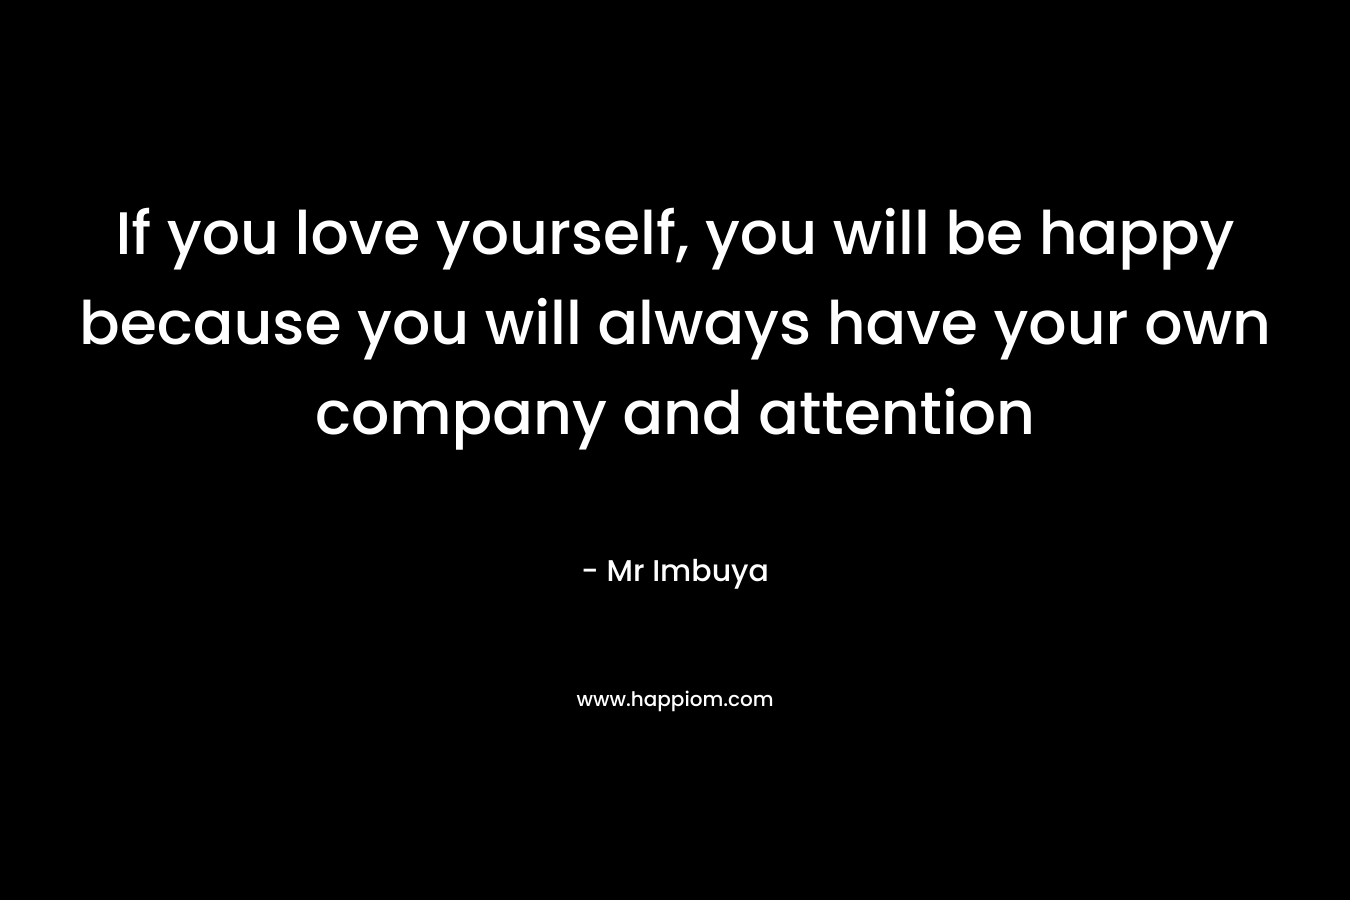 If you love yourself, you will be happy because you will always have your own company and attention – Mr Imbuya